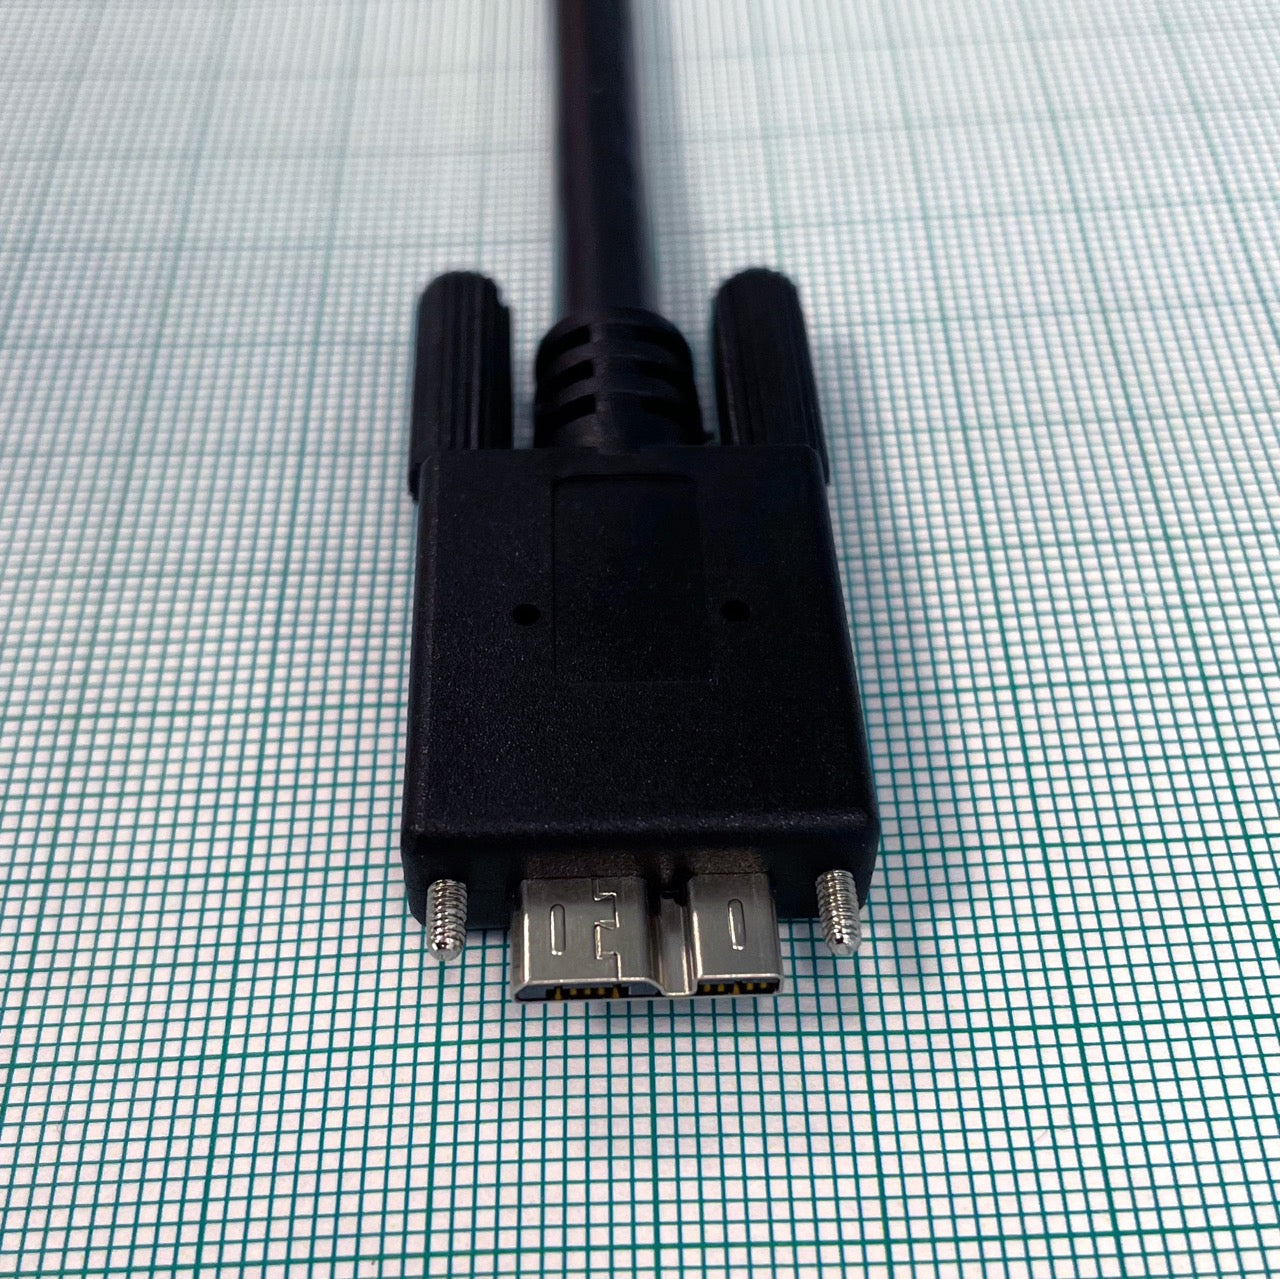 Perspective view of Type micro B USB 3.0 Vision screw lock connector